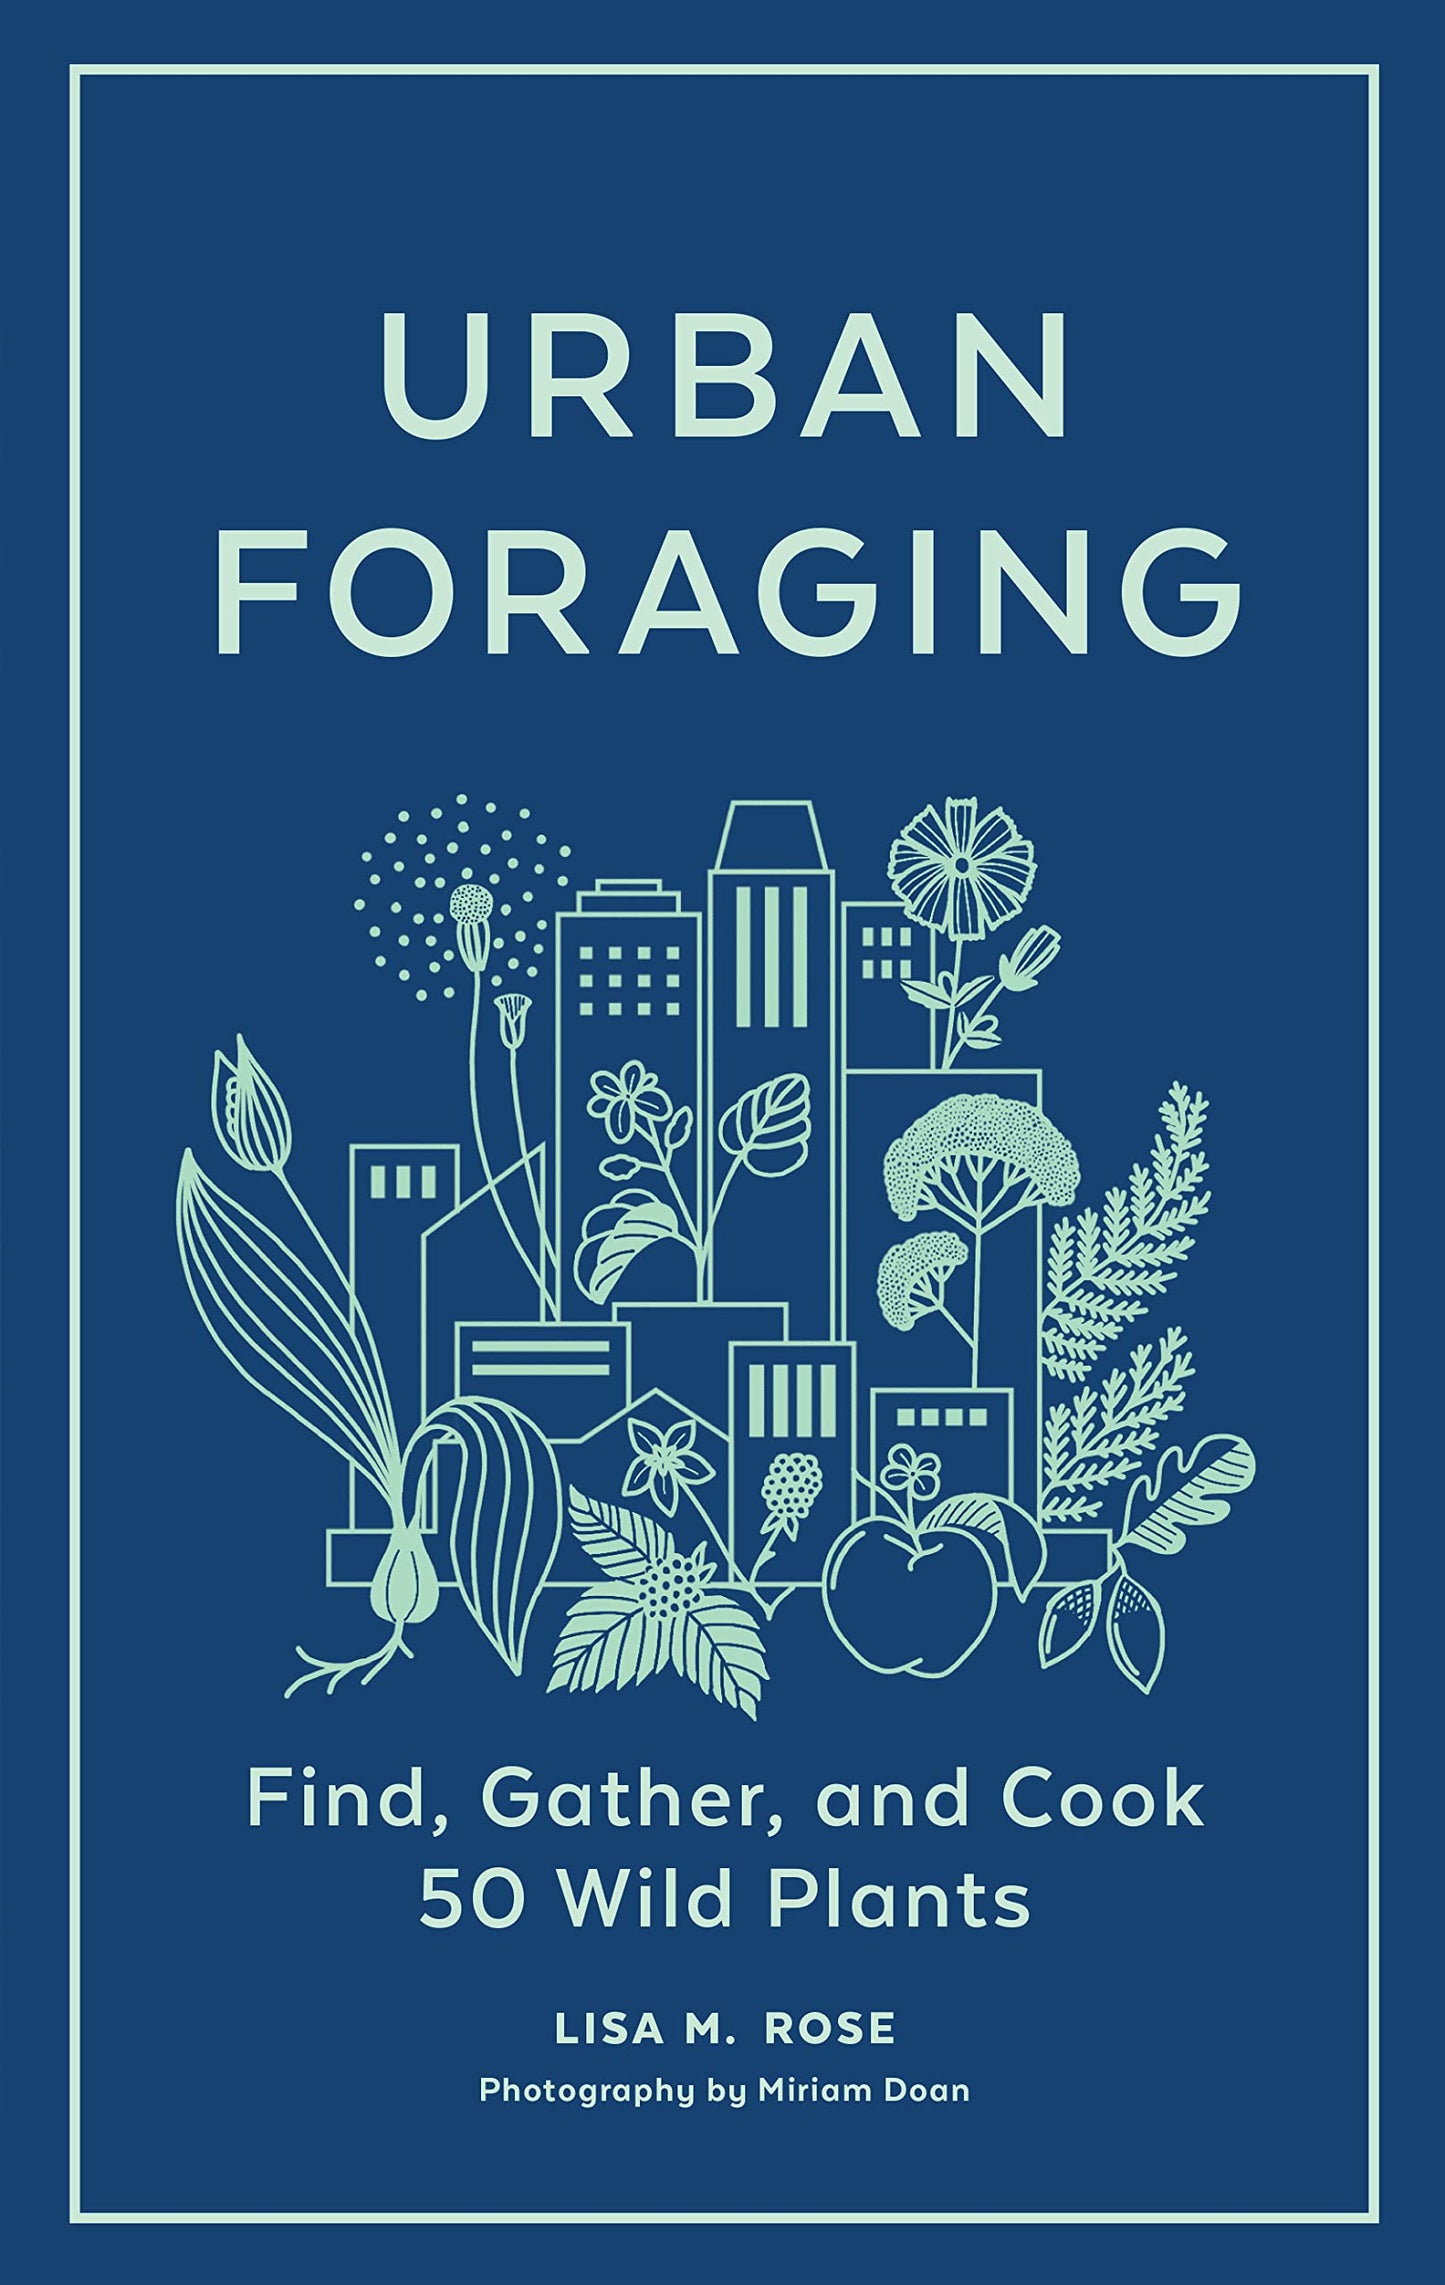 Urban Foraging: Find, Gather, and Cook 50 Wild Plants